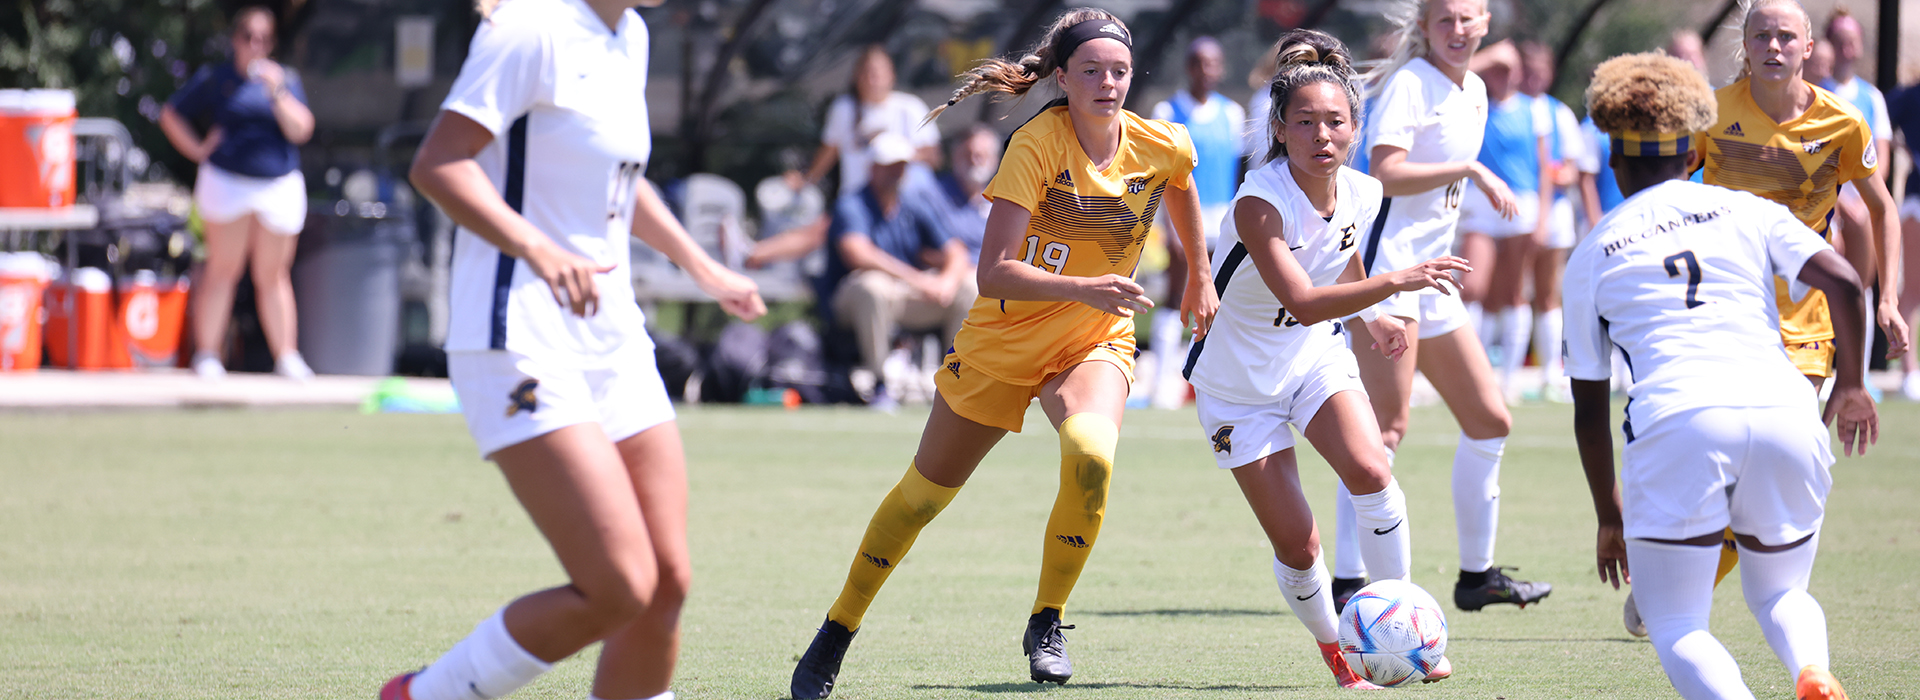 Tech soccer ends exhibition schedule with 2-1 loss to ETSU